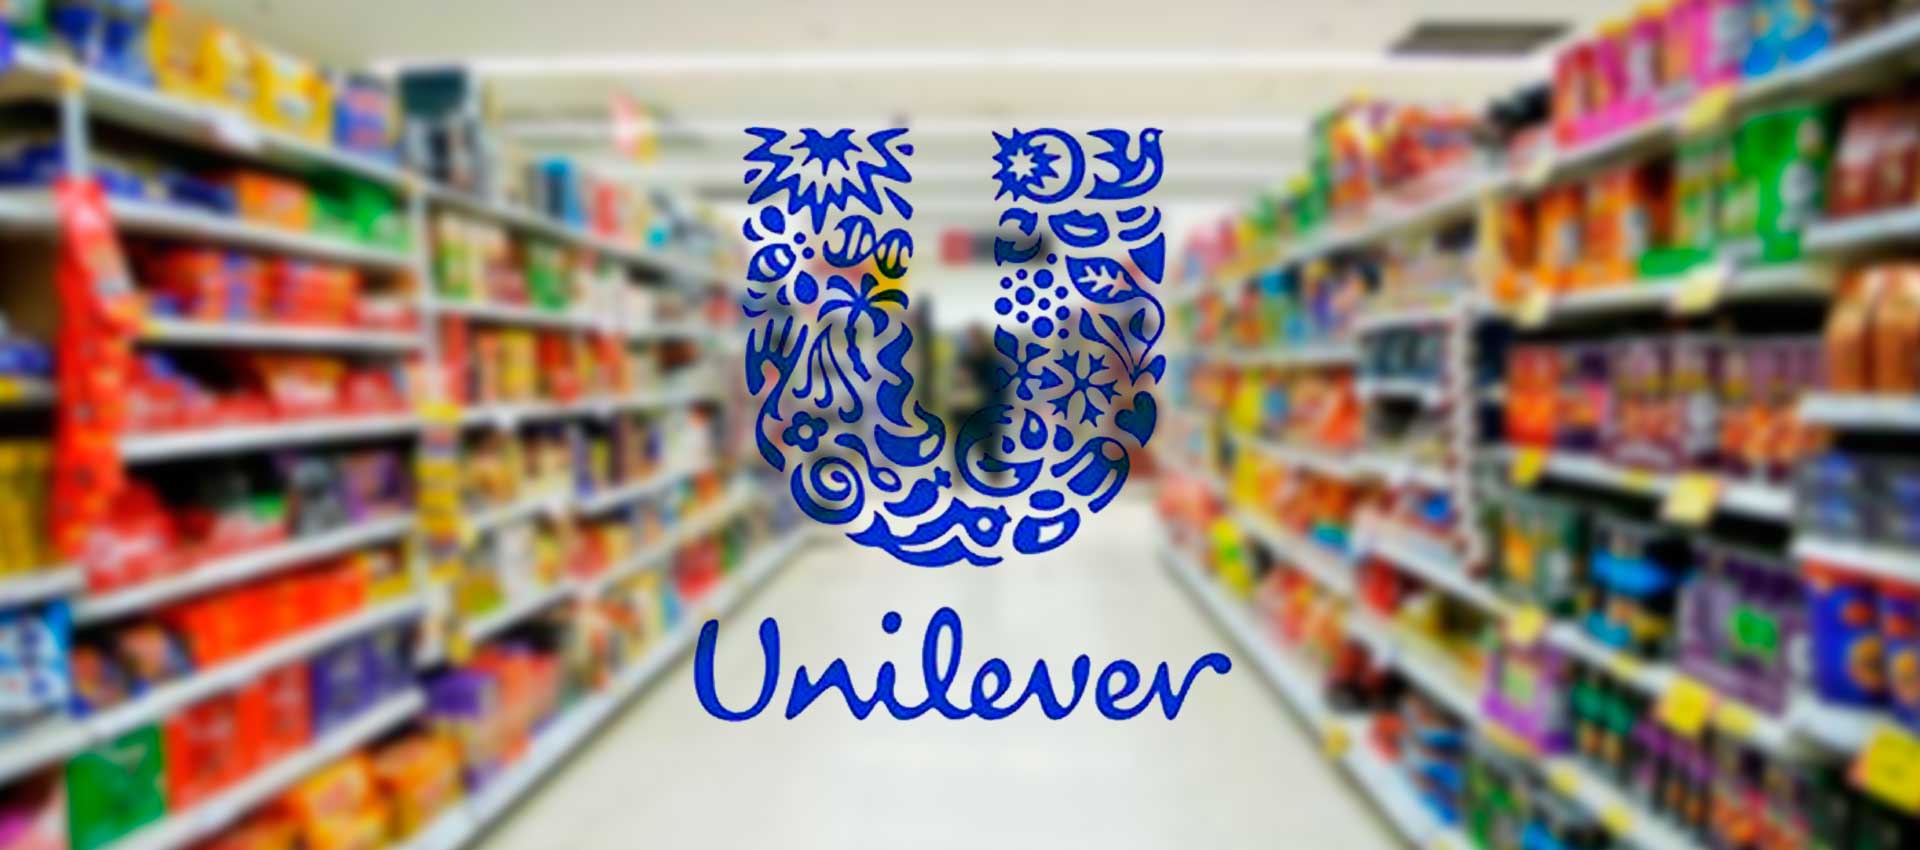 Unilever says prices hikes will continue into this year, easing in H2